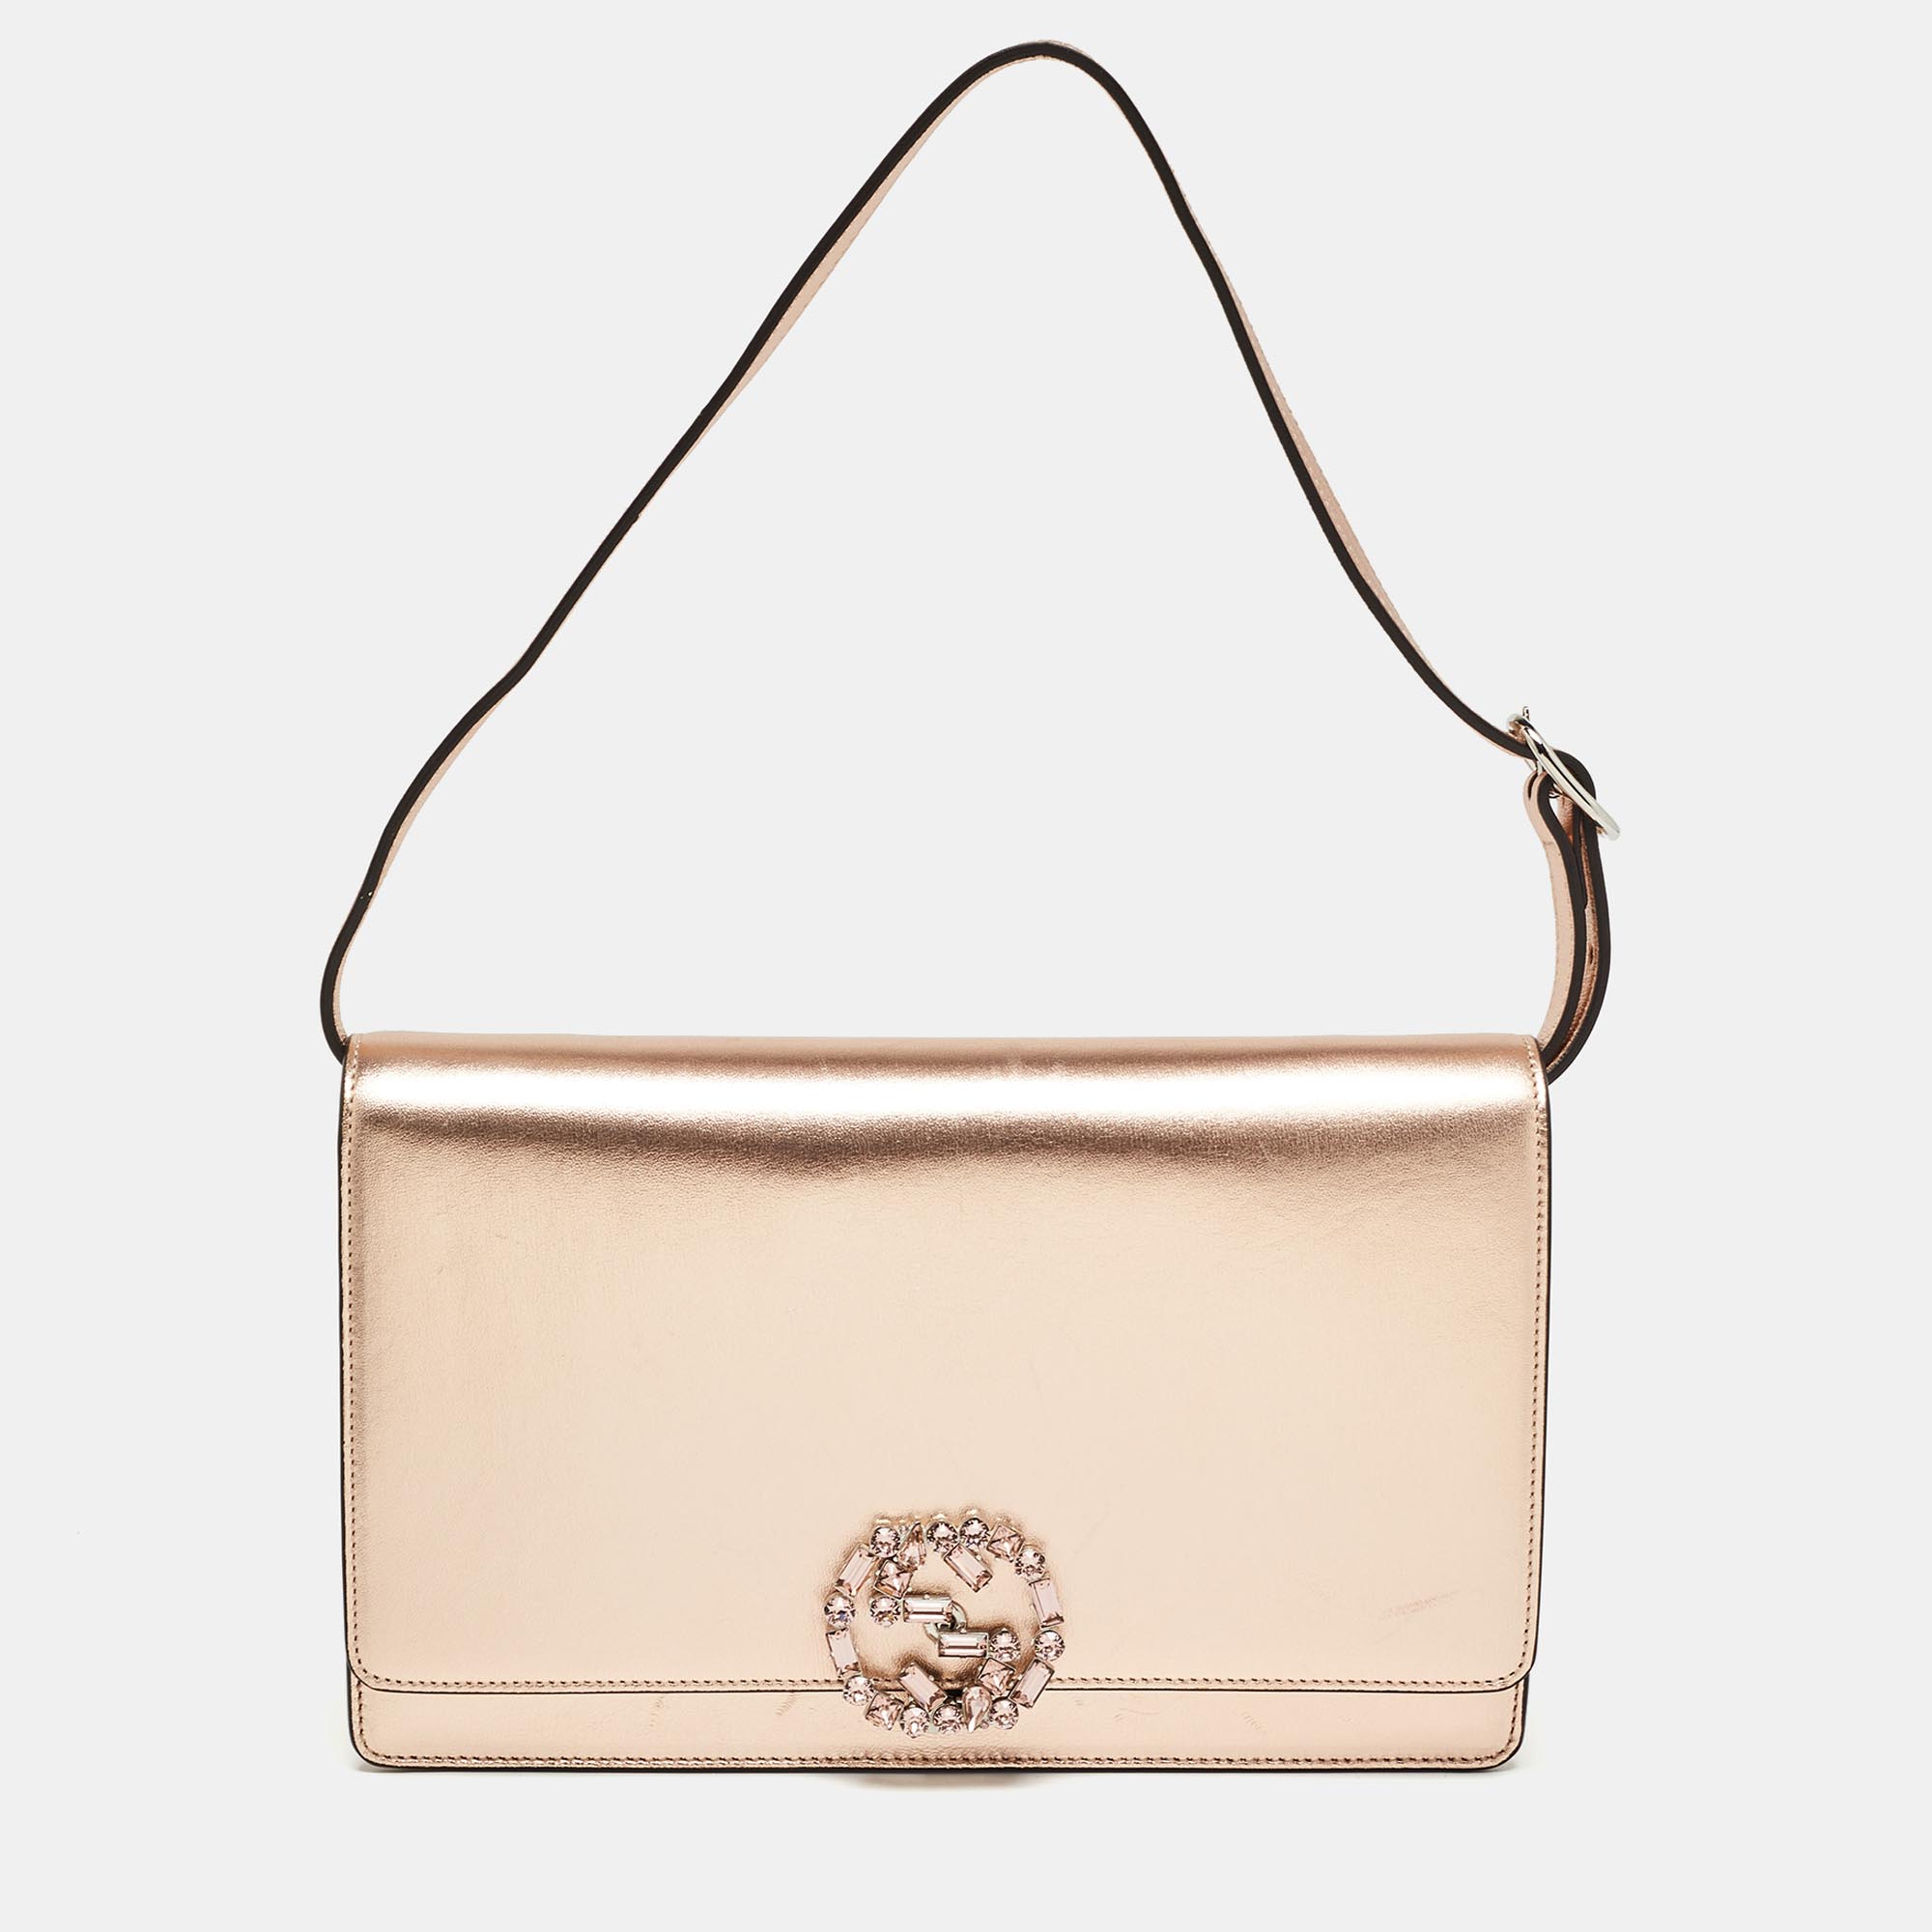 Gucci rose gold leather crystals broadway clutch bag